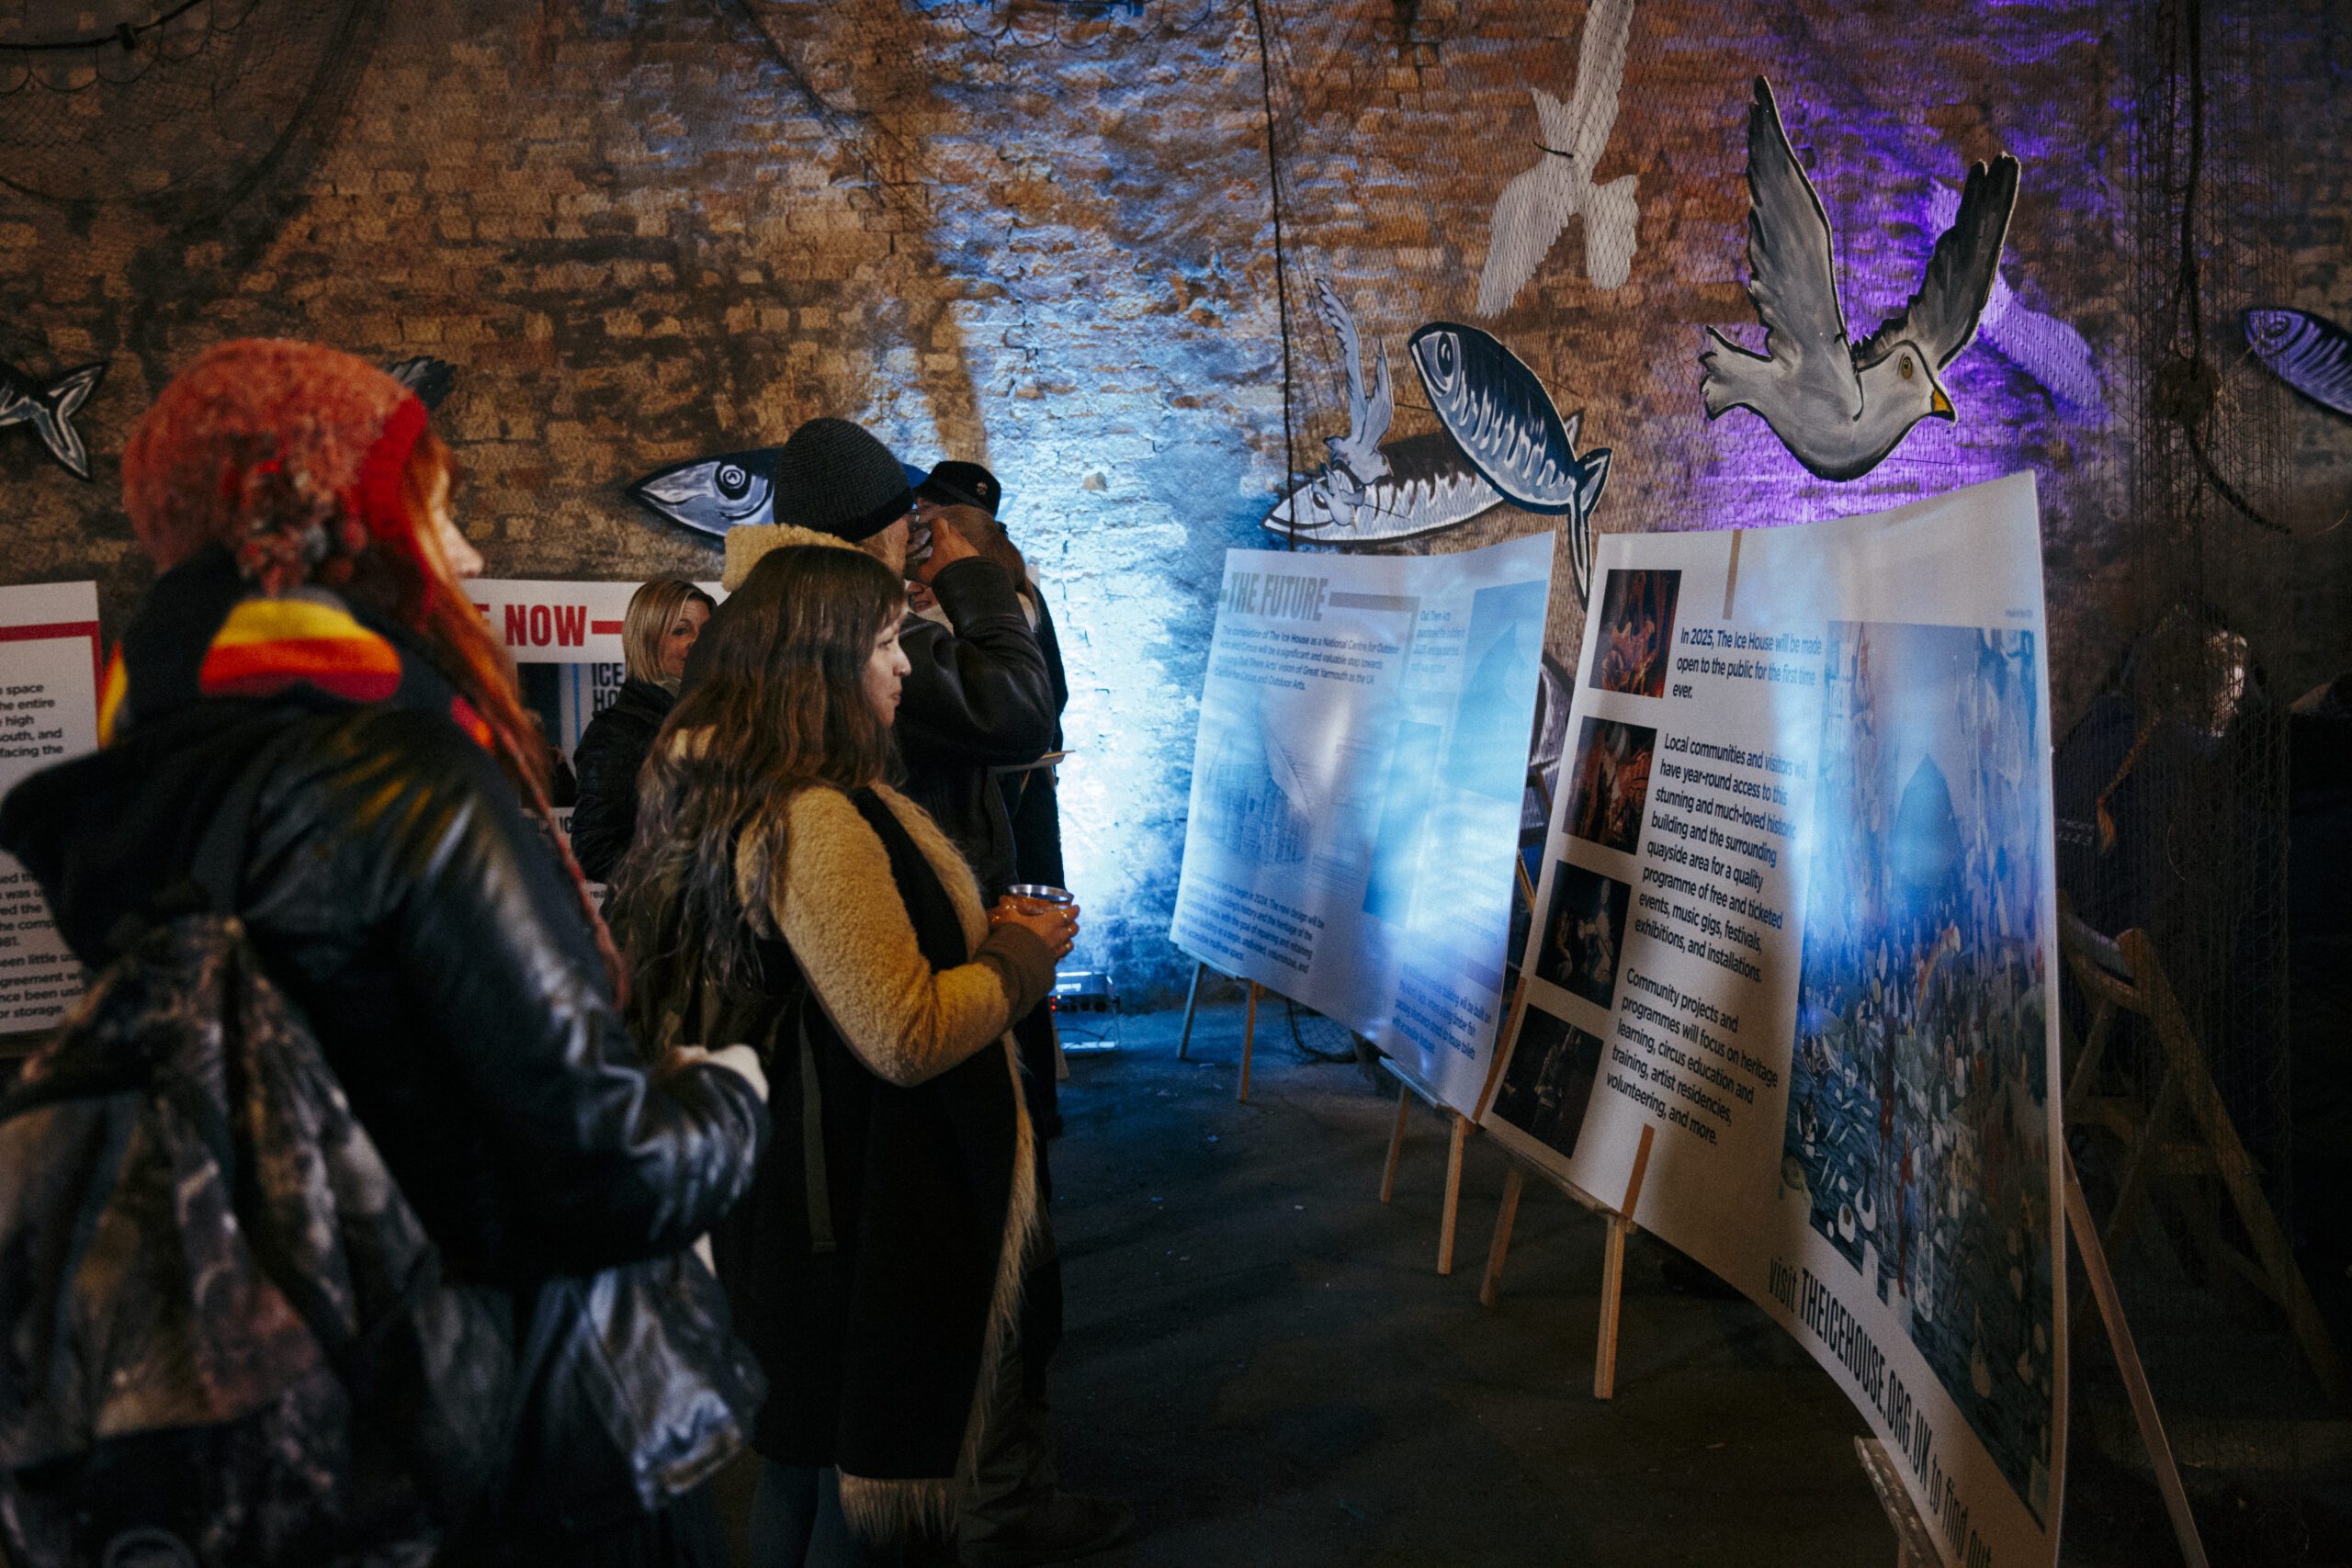 Visitors to The Ice House browsing heritage information